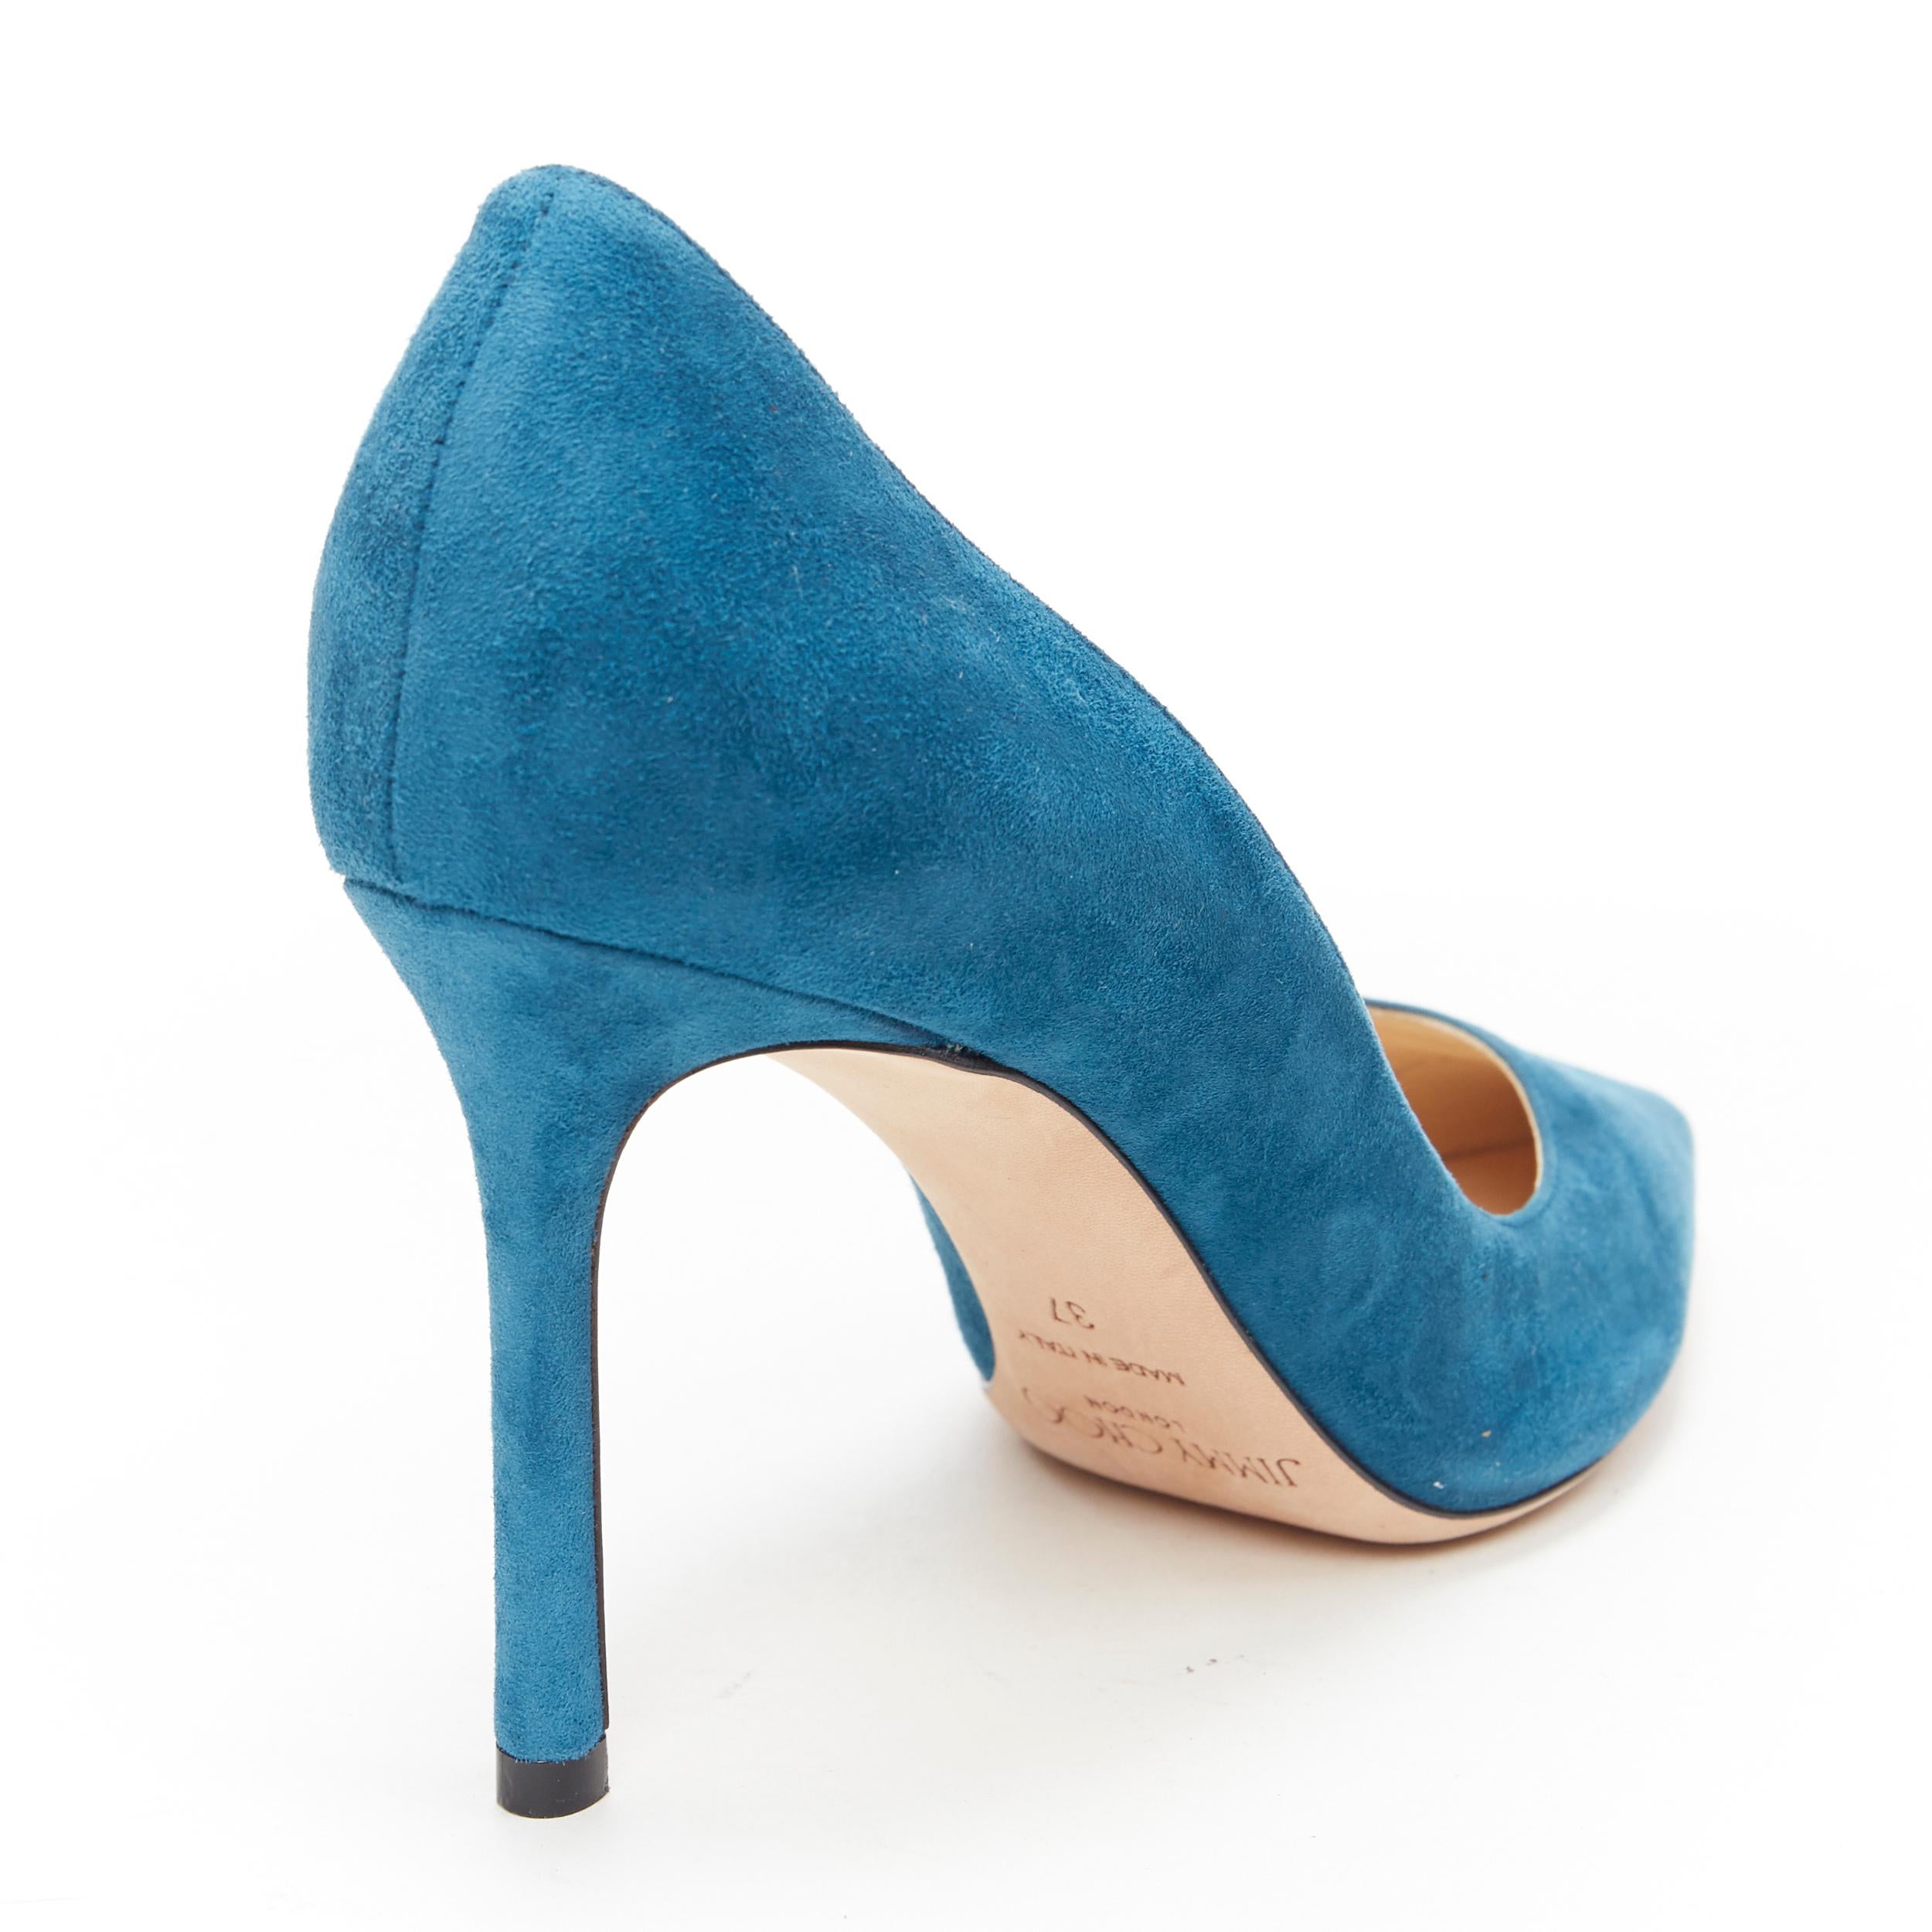 JIMMY CHOO Romy 85 teal blue suede leather point toe pigalle pump EU37 3